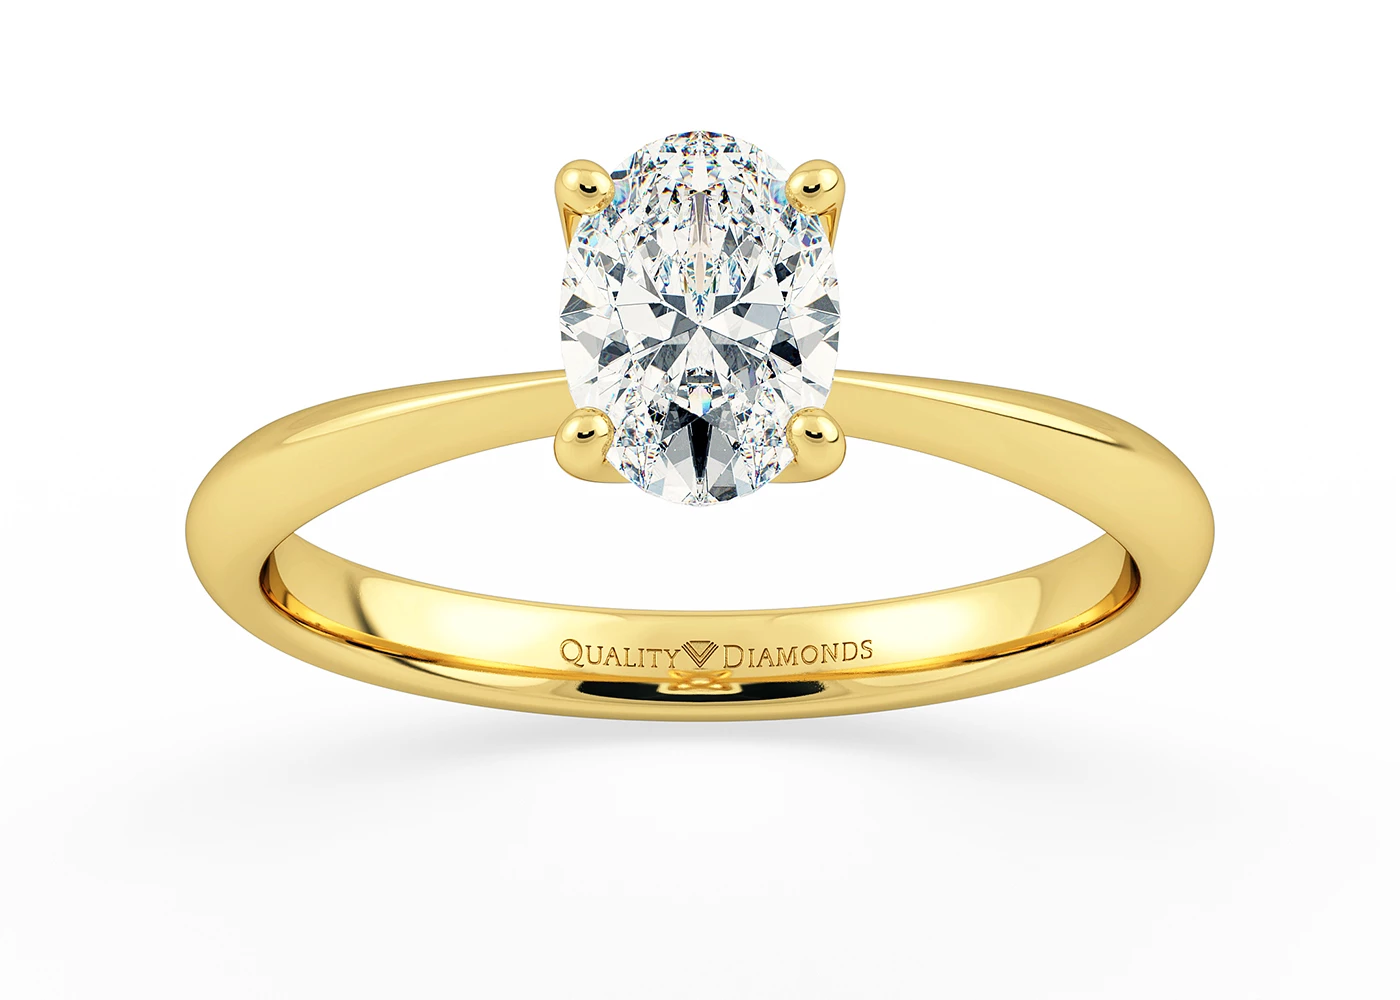 Two Carat Oval Solitaire Diamond Engagement Ring in 18K Yellow Gold